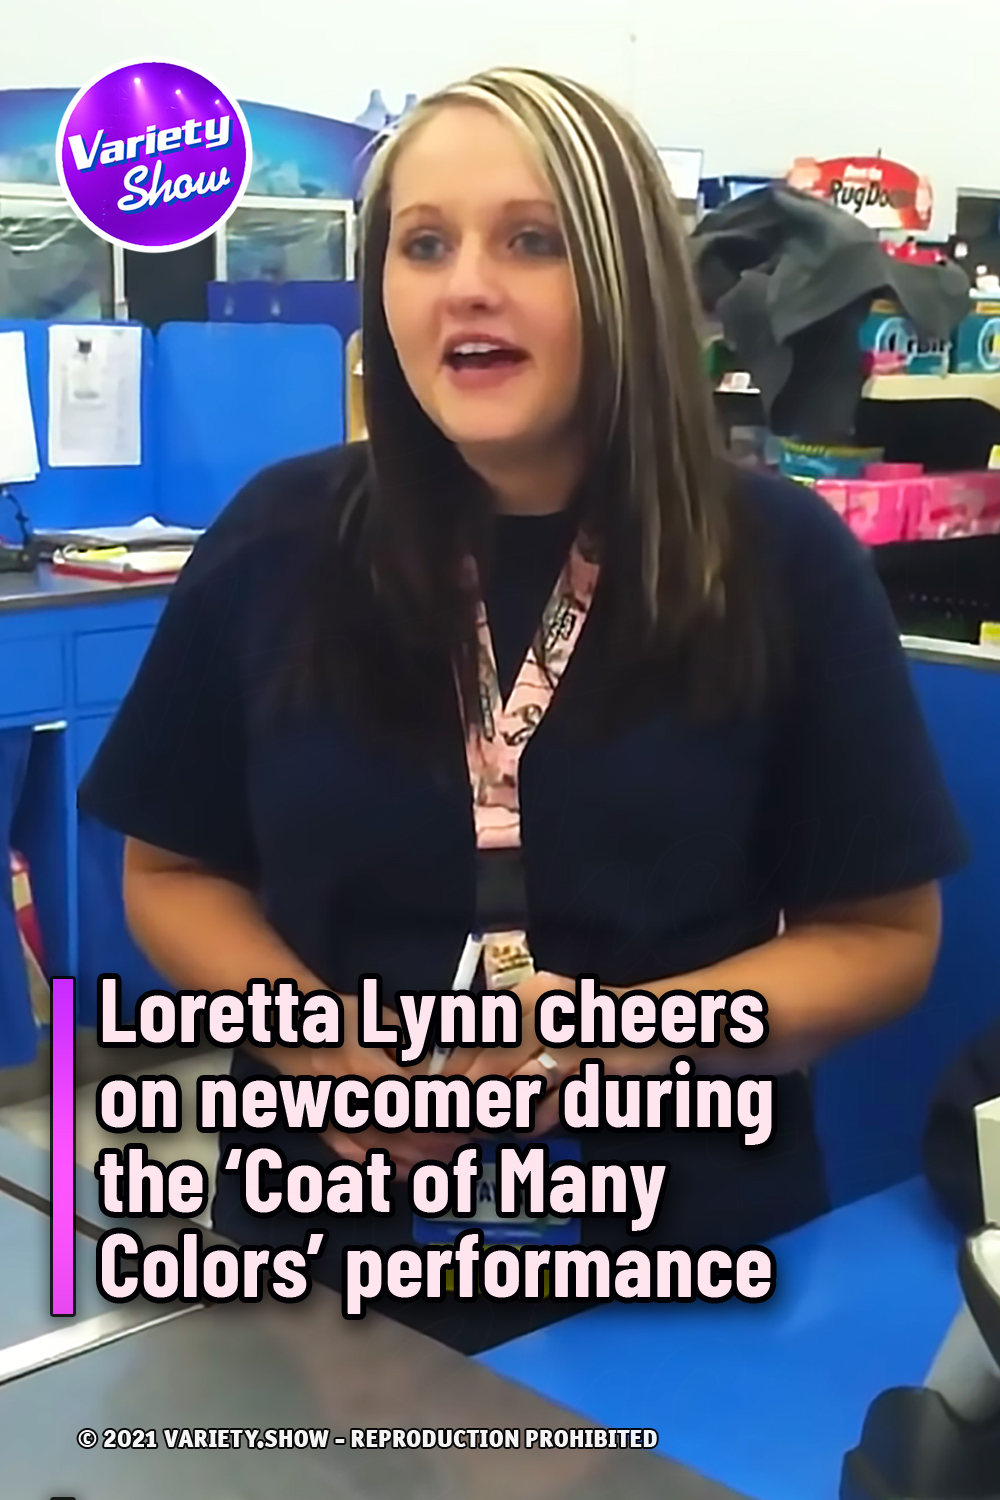 Loretta Lynn cheers on newcomer during the ‘Coat of Many Colors’ performance